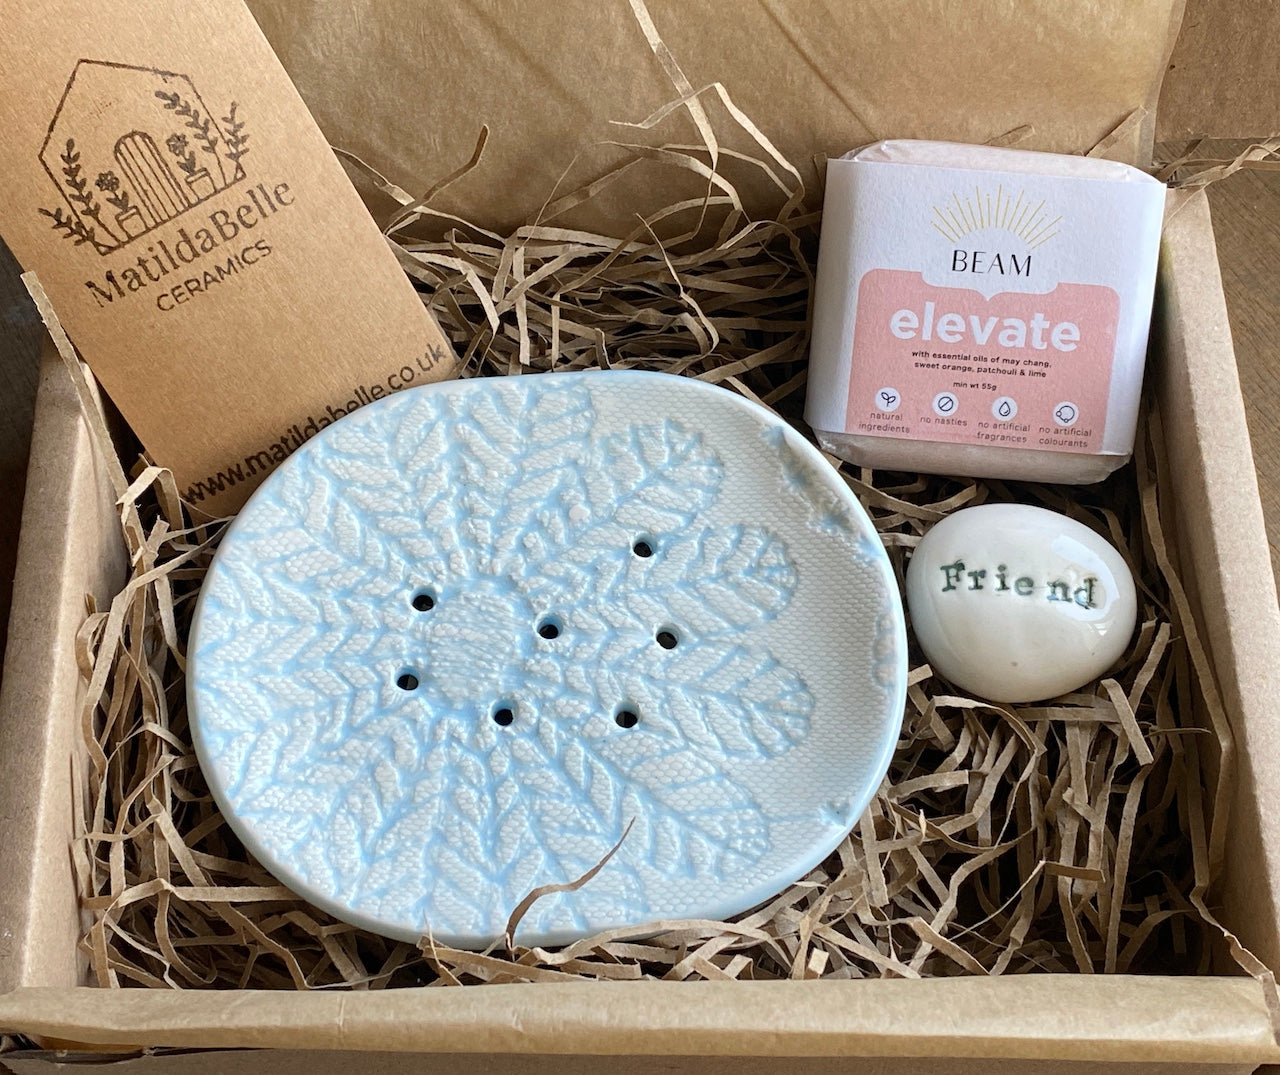 Handmade Ceramic Curated Gift Boxes - Artisan Crafted & Thoughtfully Designed